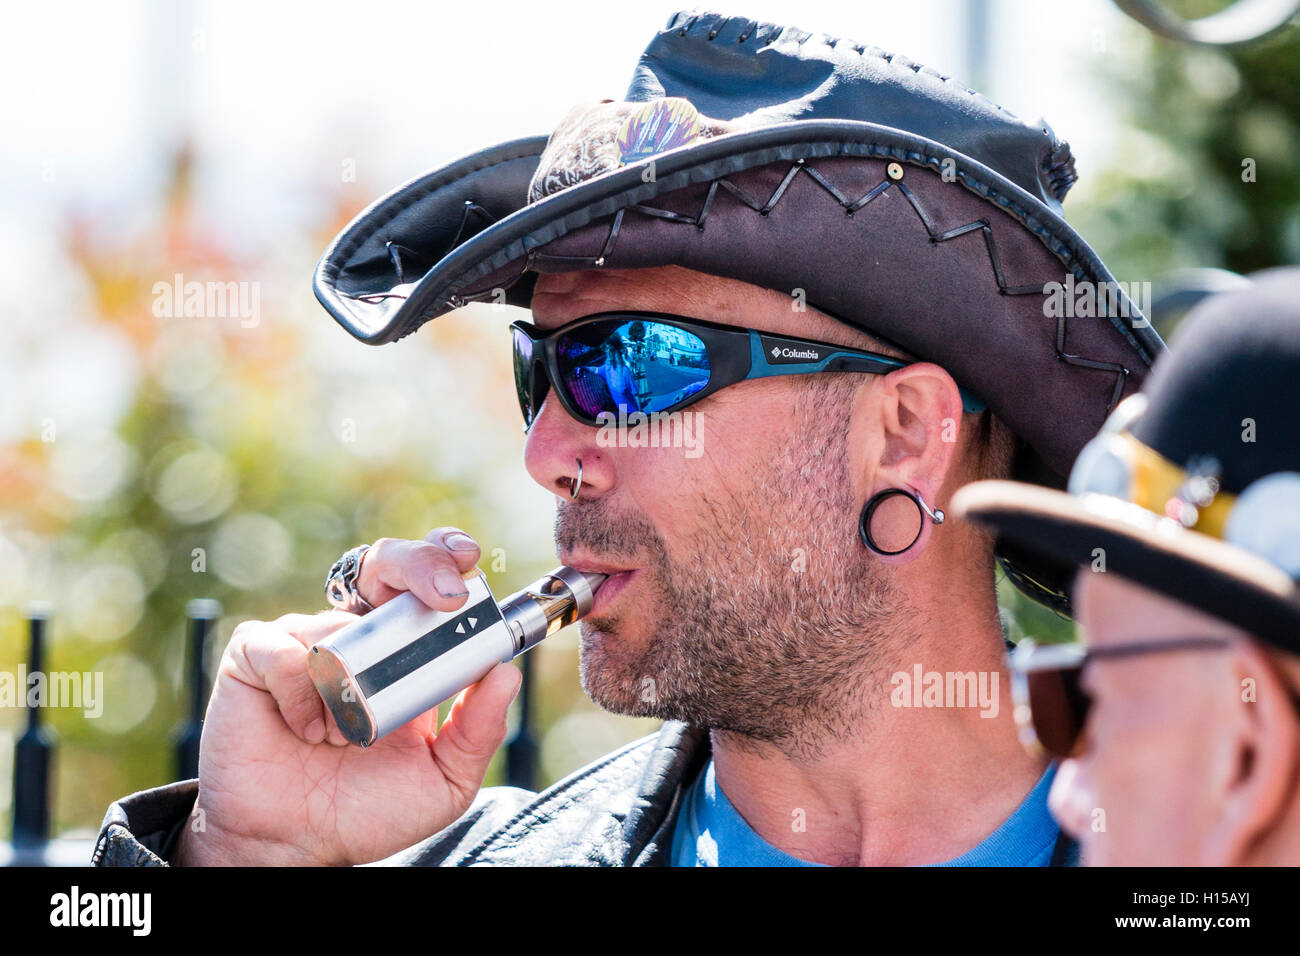 Caucasian man, unshaven and wearing cowboy hat and sunglasses, taking a puff from an e-cigarette, vape pen. Head and shoulder shot, side view. Stock Photo